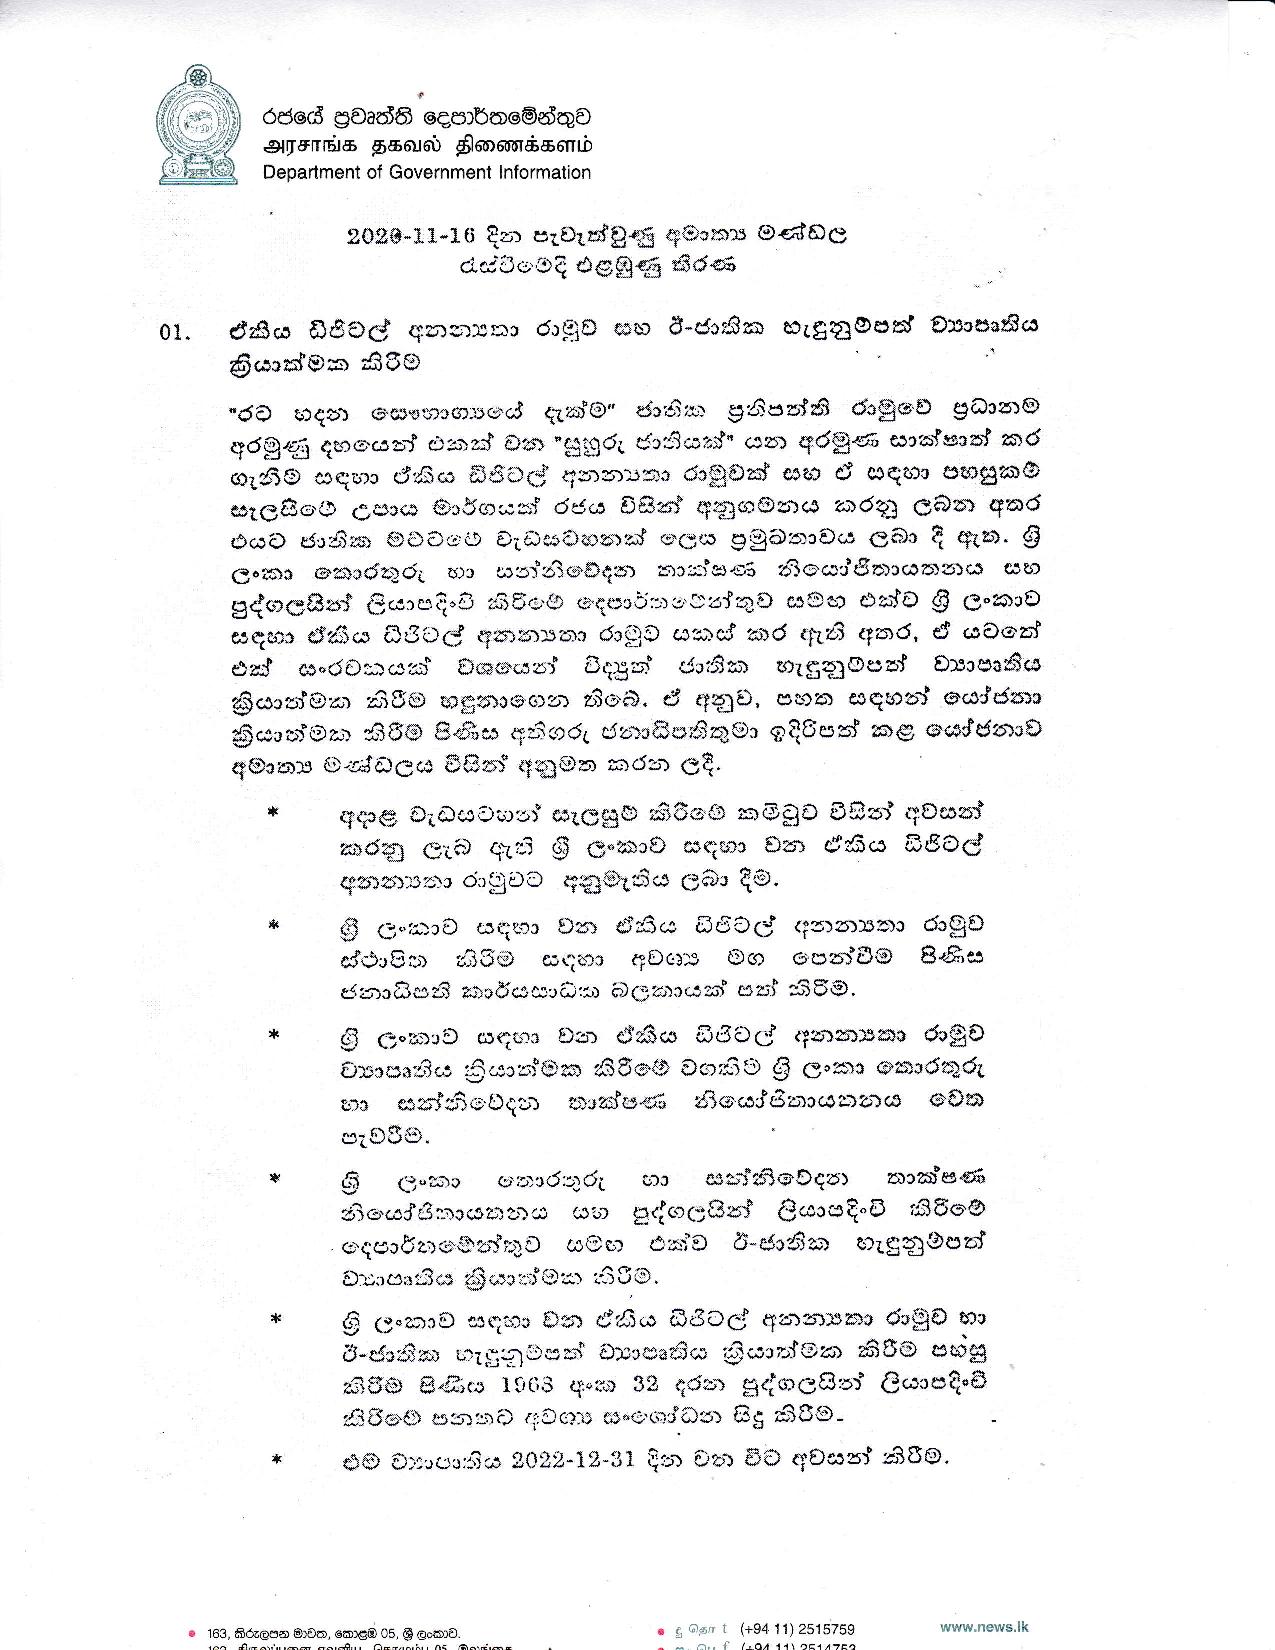 Cabinet Decision on 16.11.2020 page 001